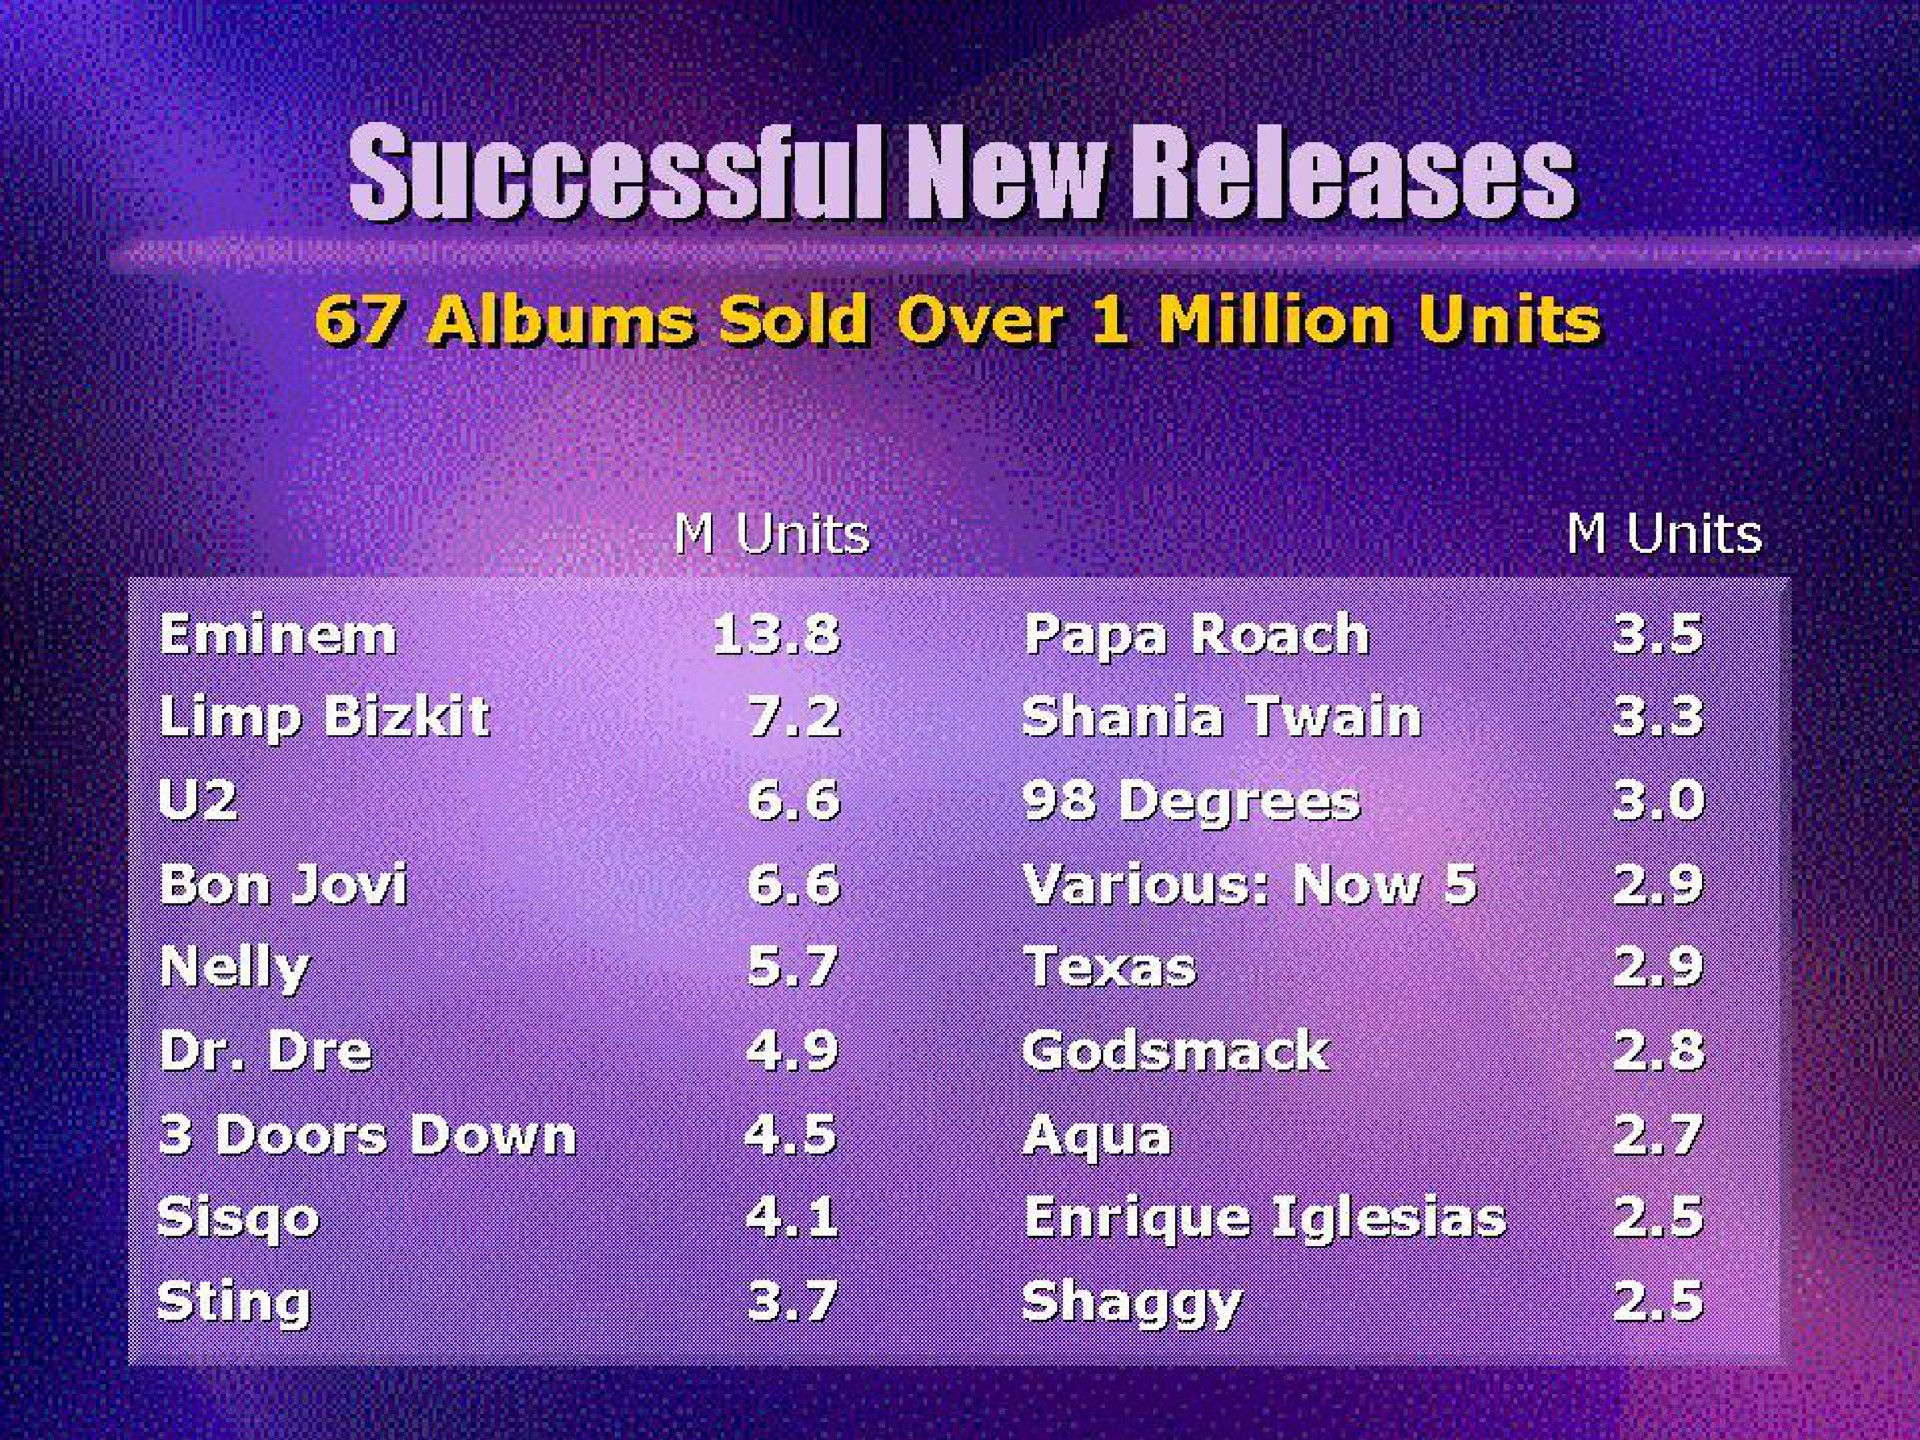 old over million units | Universal Music Group